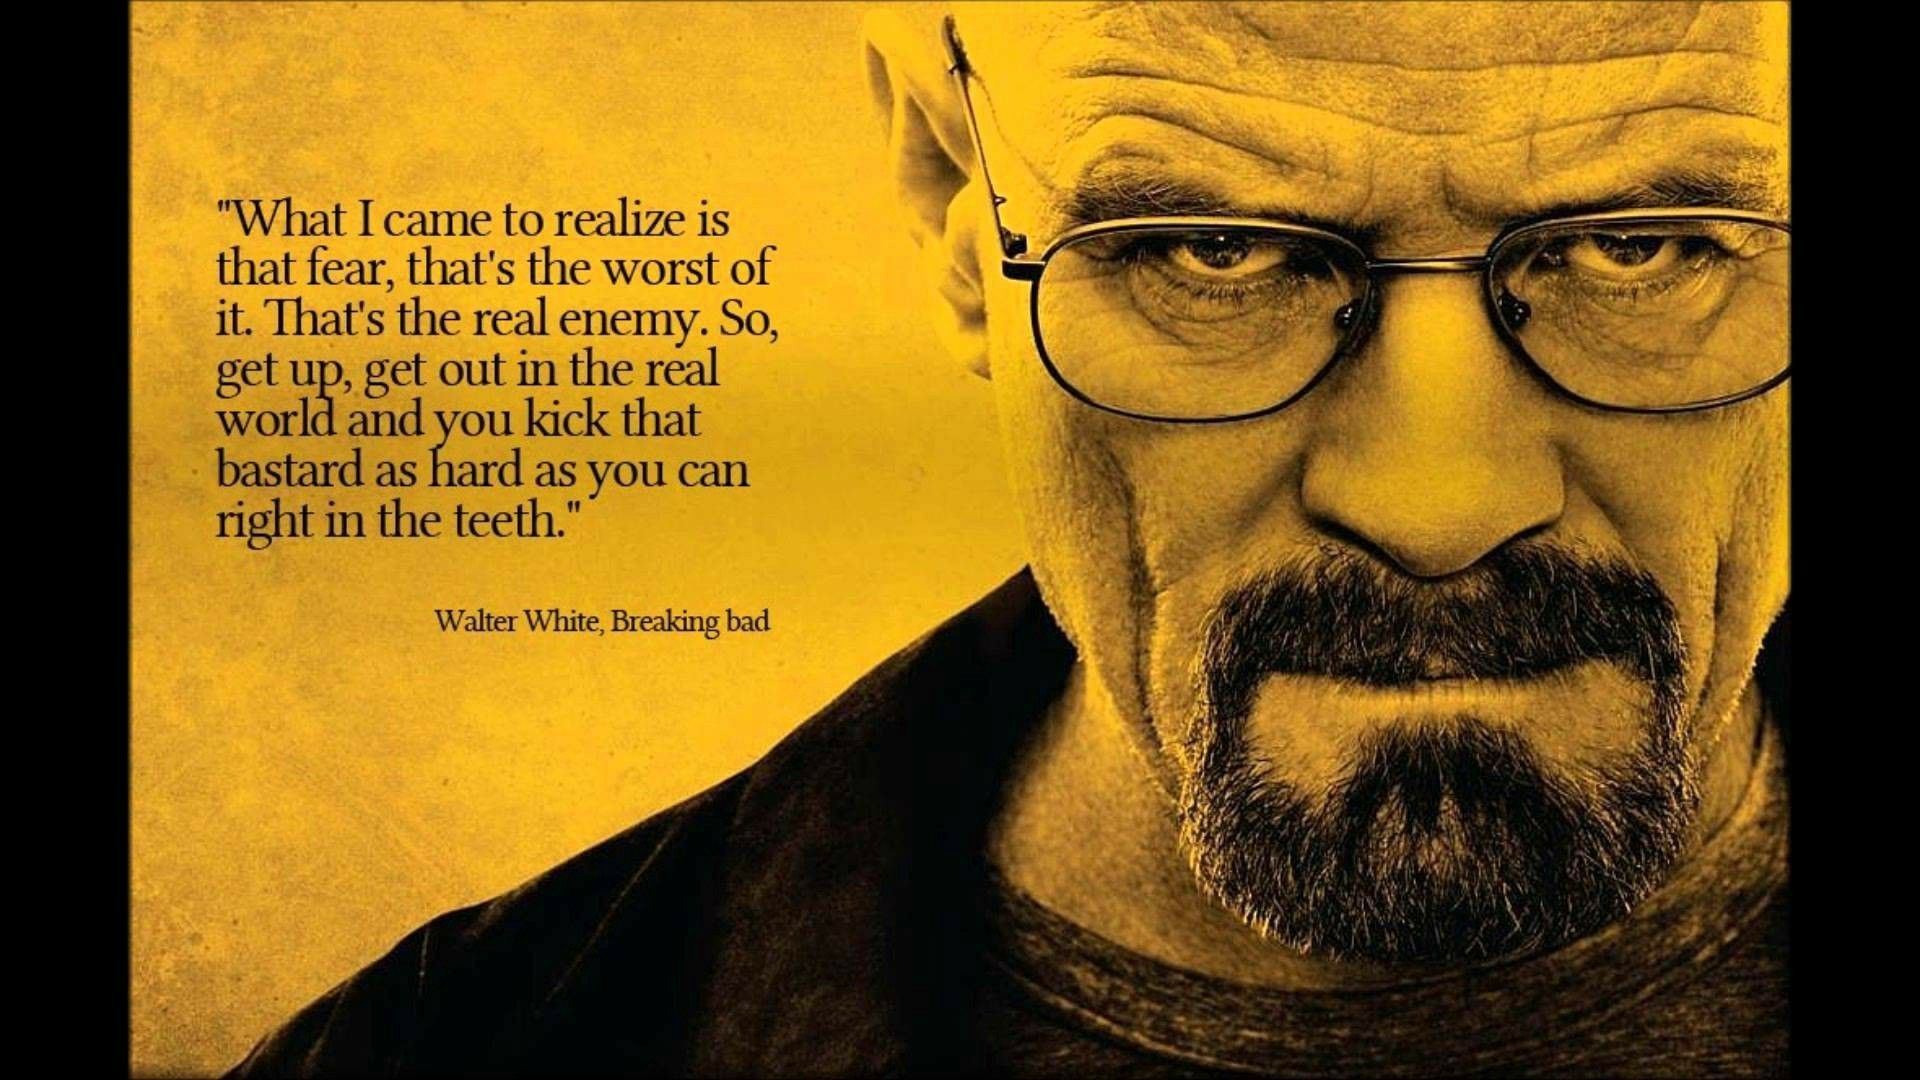 Walter White Fear quote. Breaking bad, Walter white quotes, Bad quotes